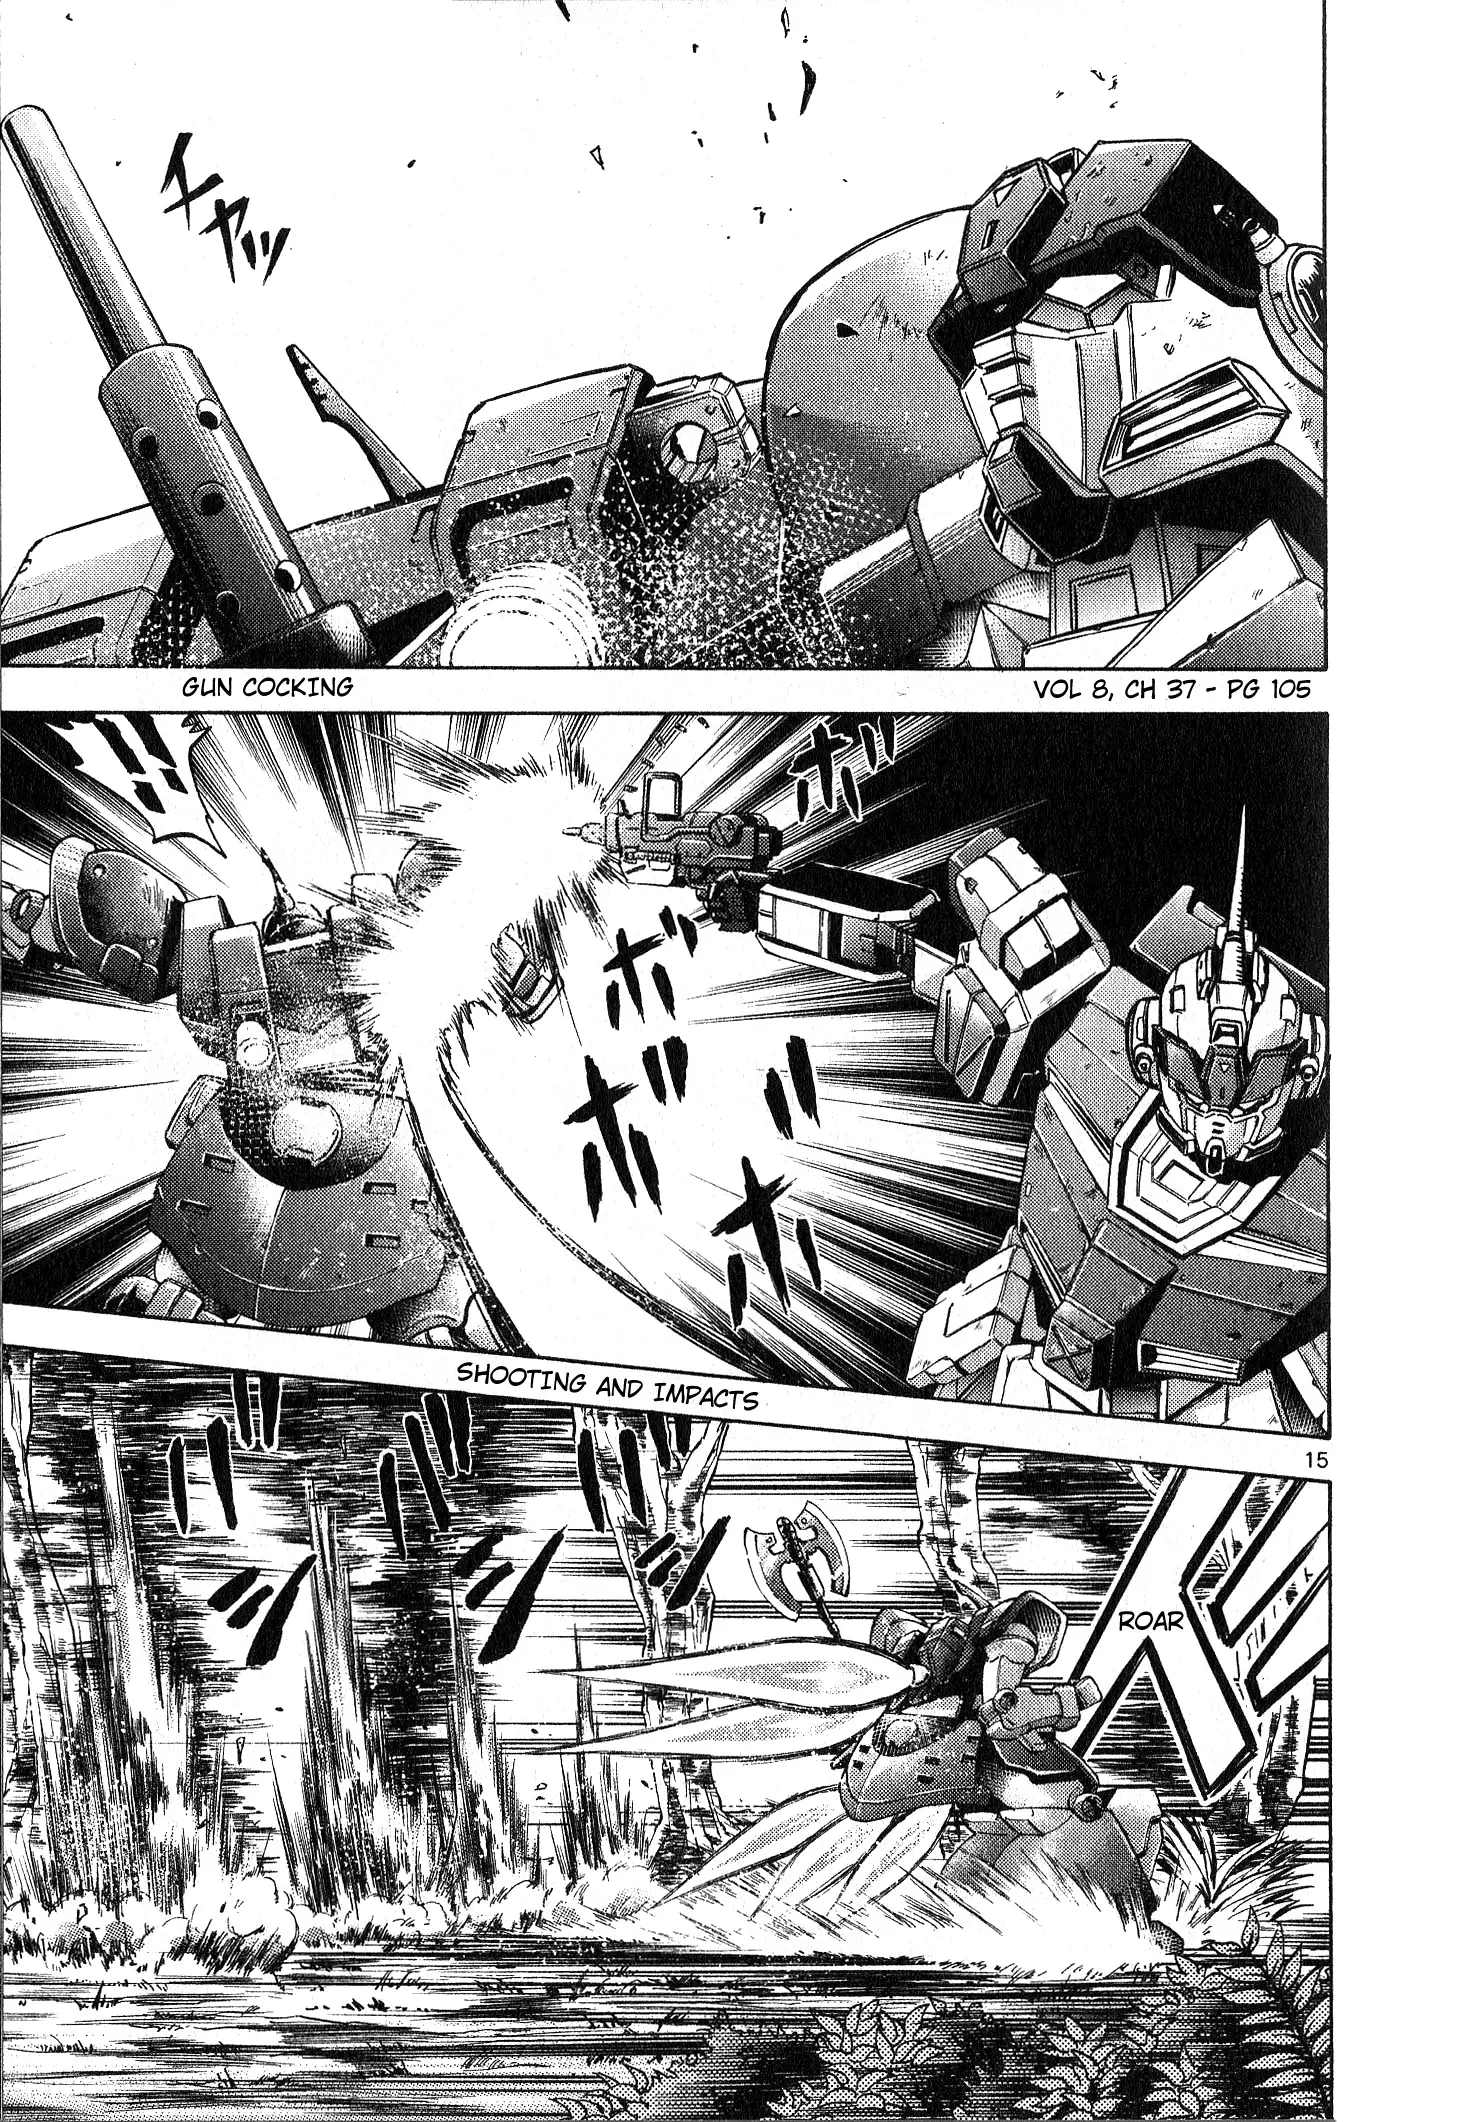 Mobile Suit Gundam Aggressor - 37 page 15-9babadc2